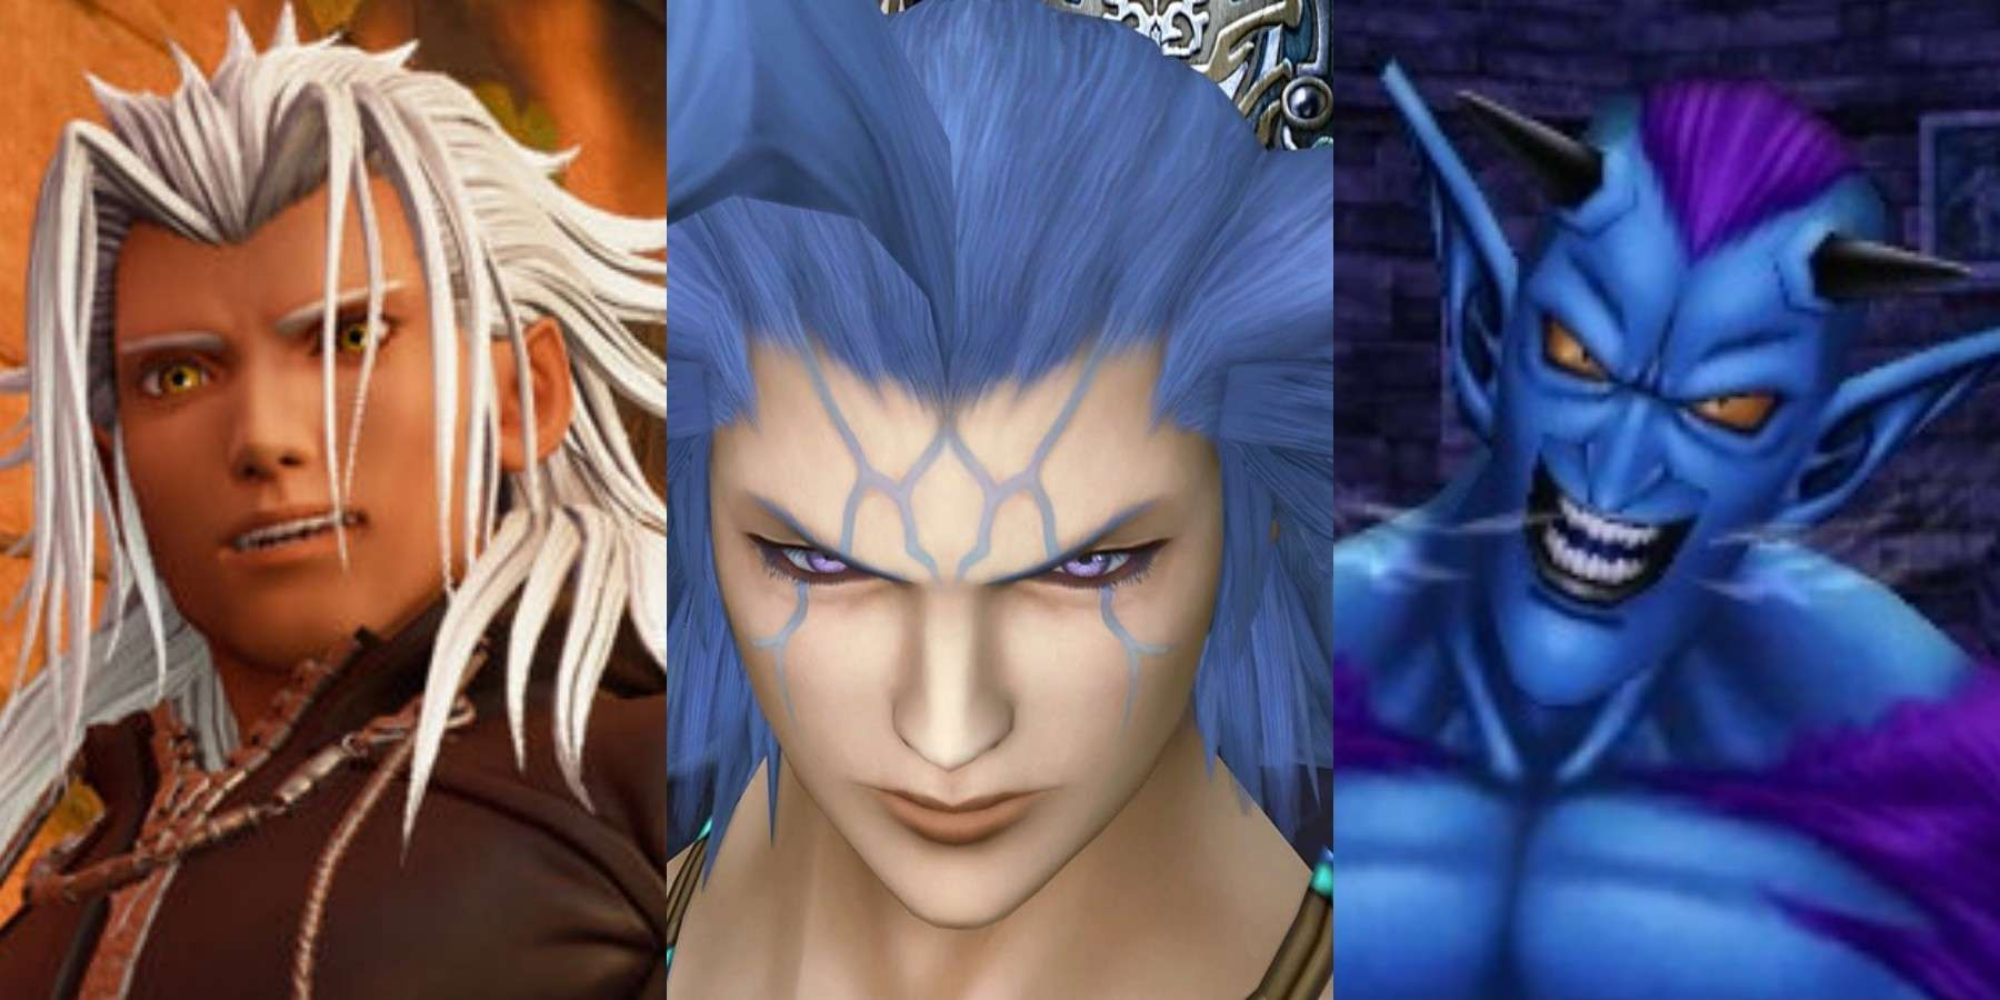 Cover image of Kingdom Hearts Xemnas, Final Fantasy X 10 Seymour Guado, and Dragon Quest VIII 8 Dhoulmagus